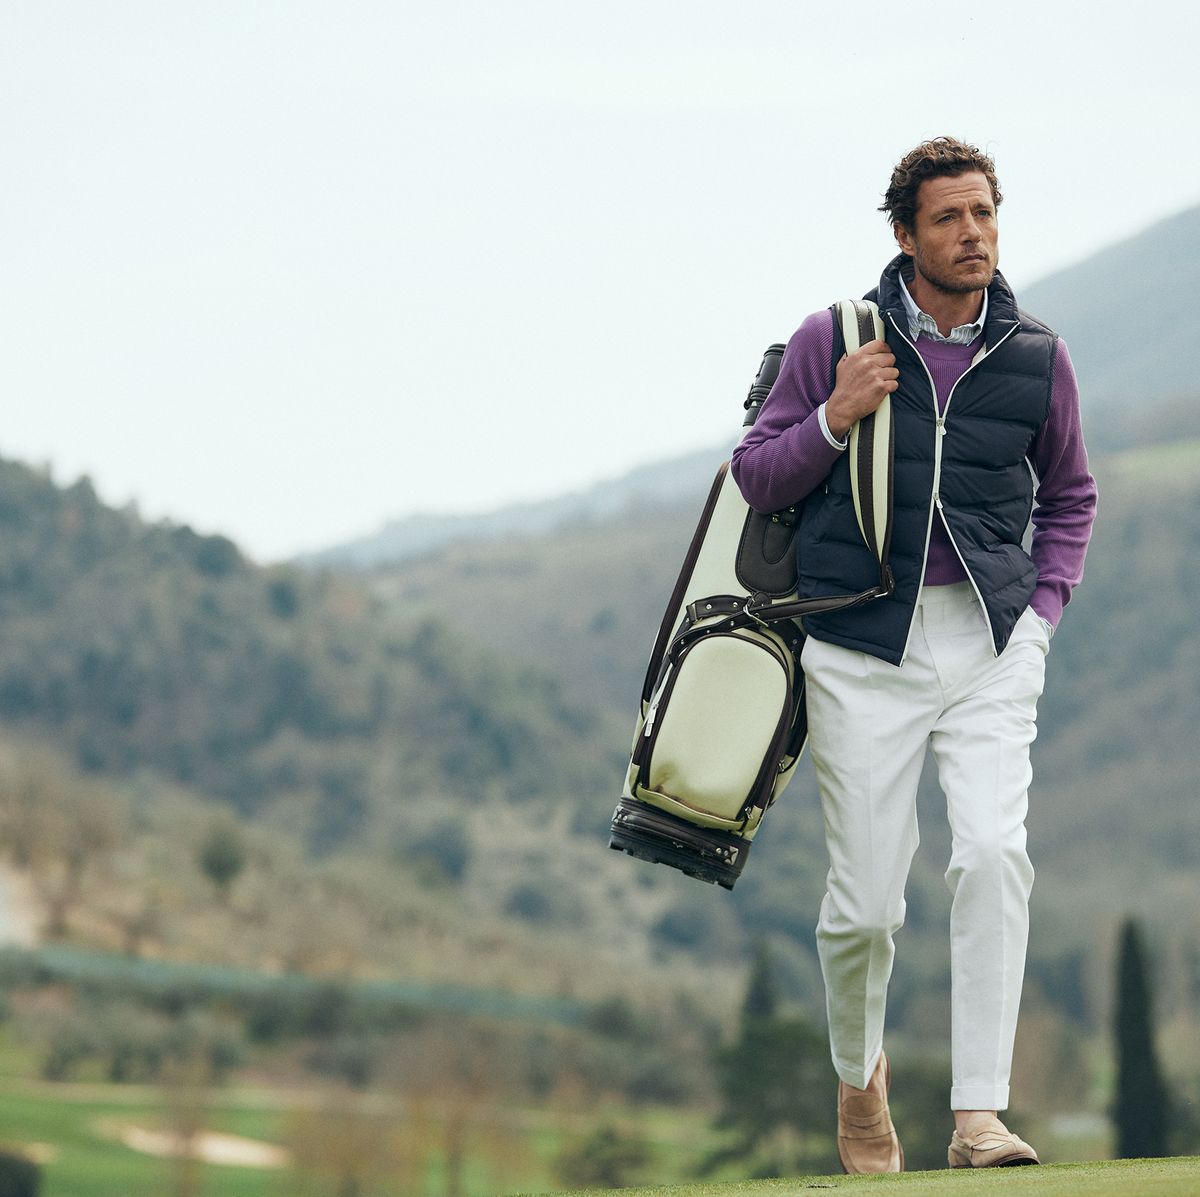 Saks Just Launched an Exclusive Brunello Cucinelli Men's Sports